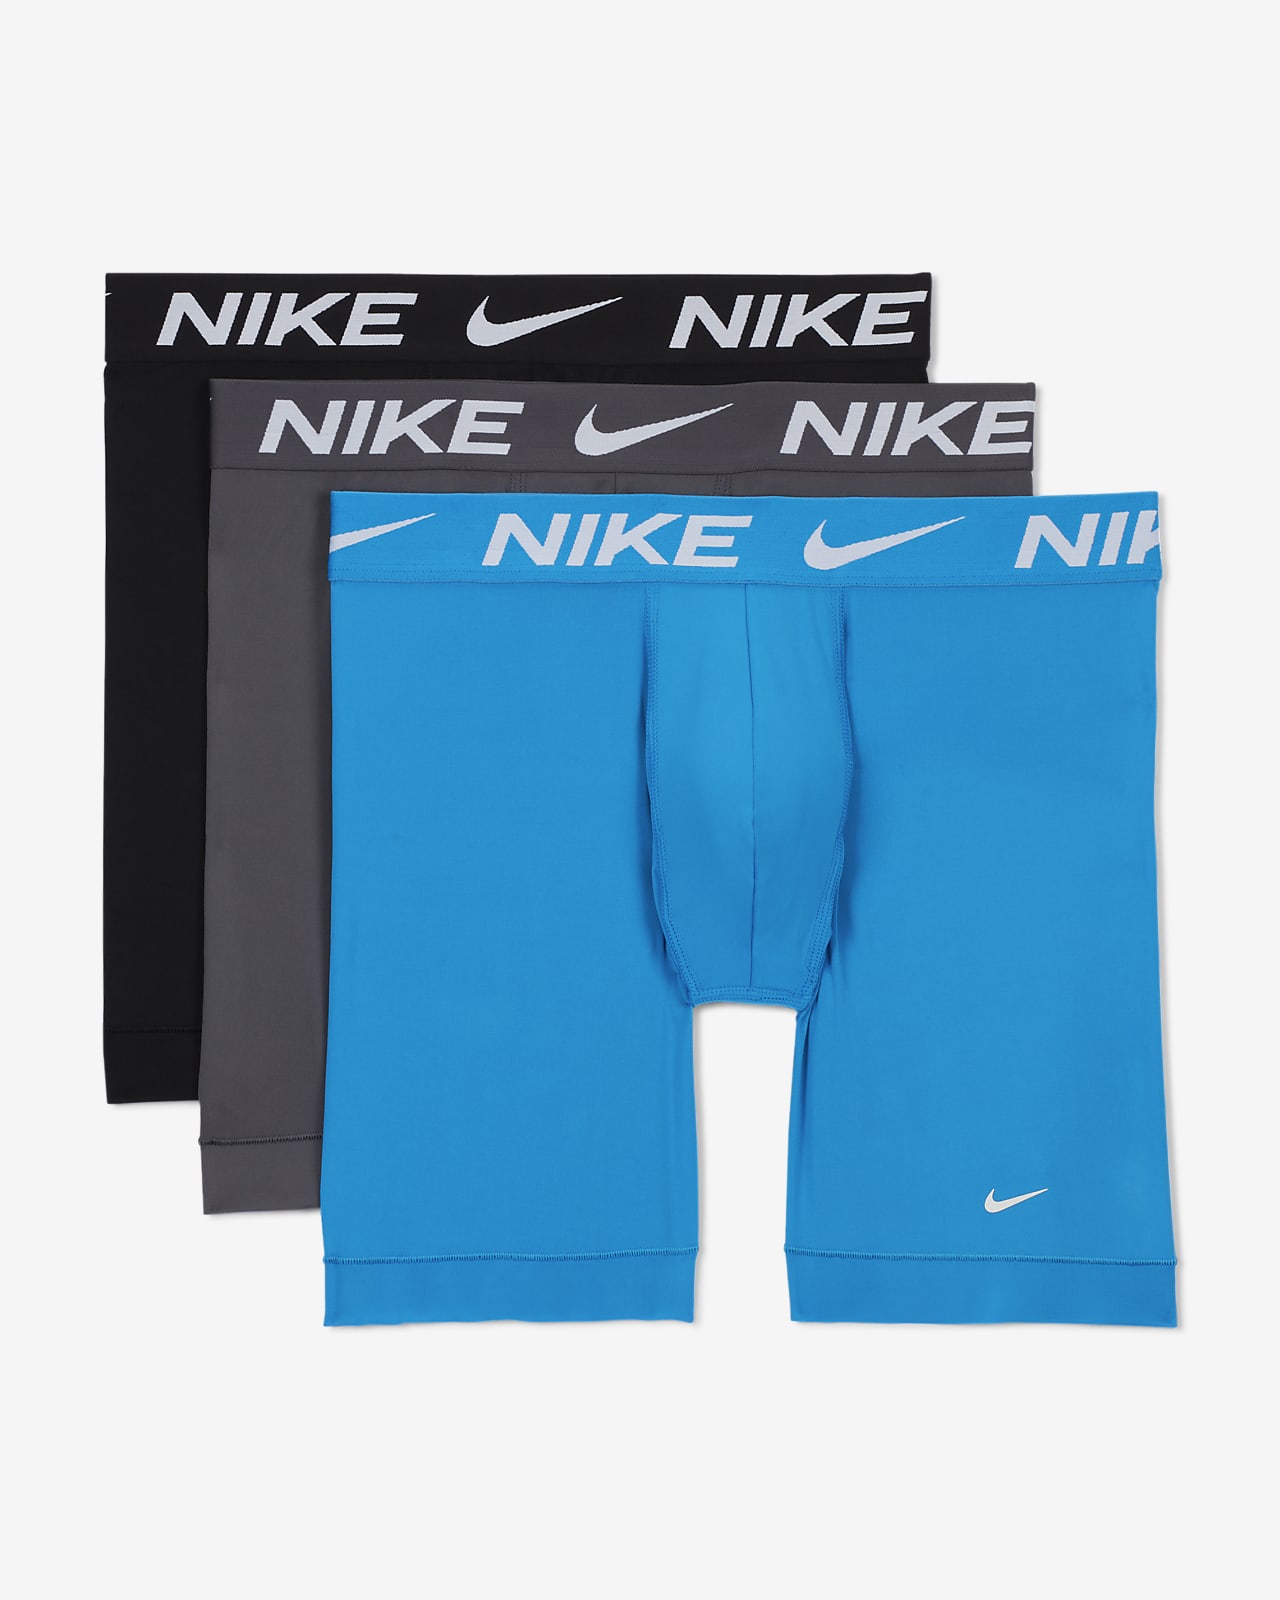 Nike Dri-FIT Essential Micro 3 pack long boxer brief in red white blue S M L